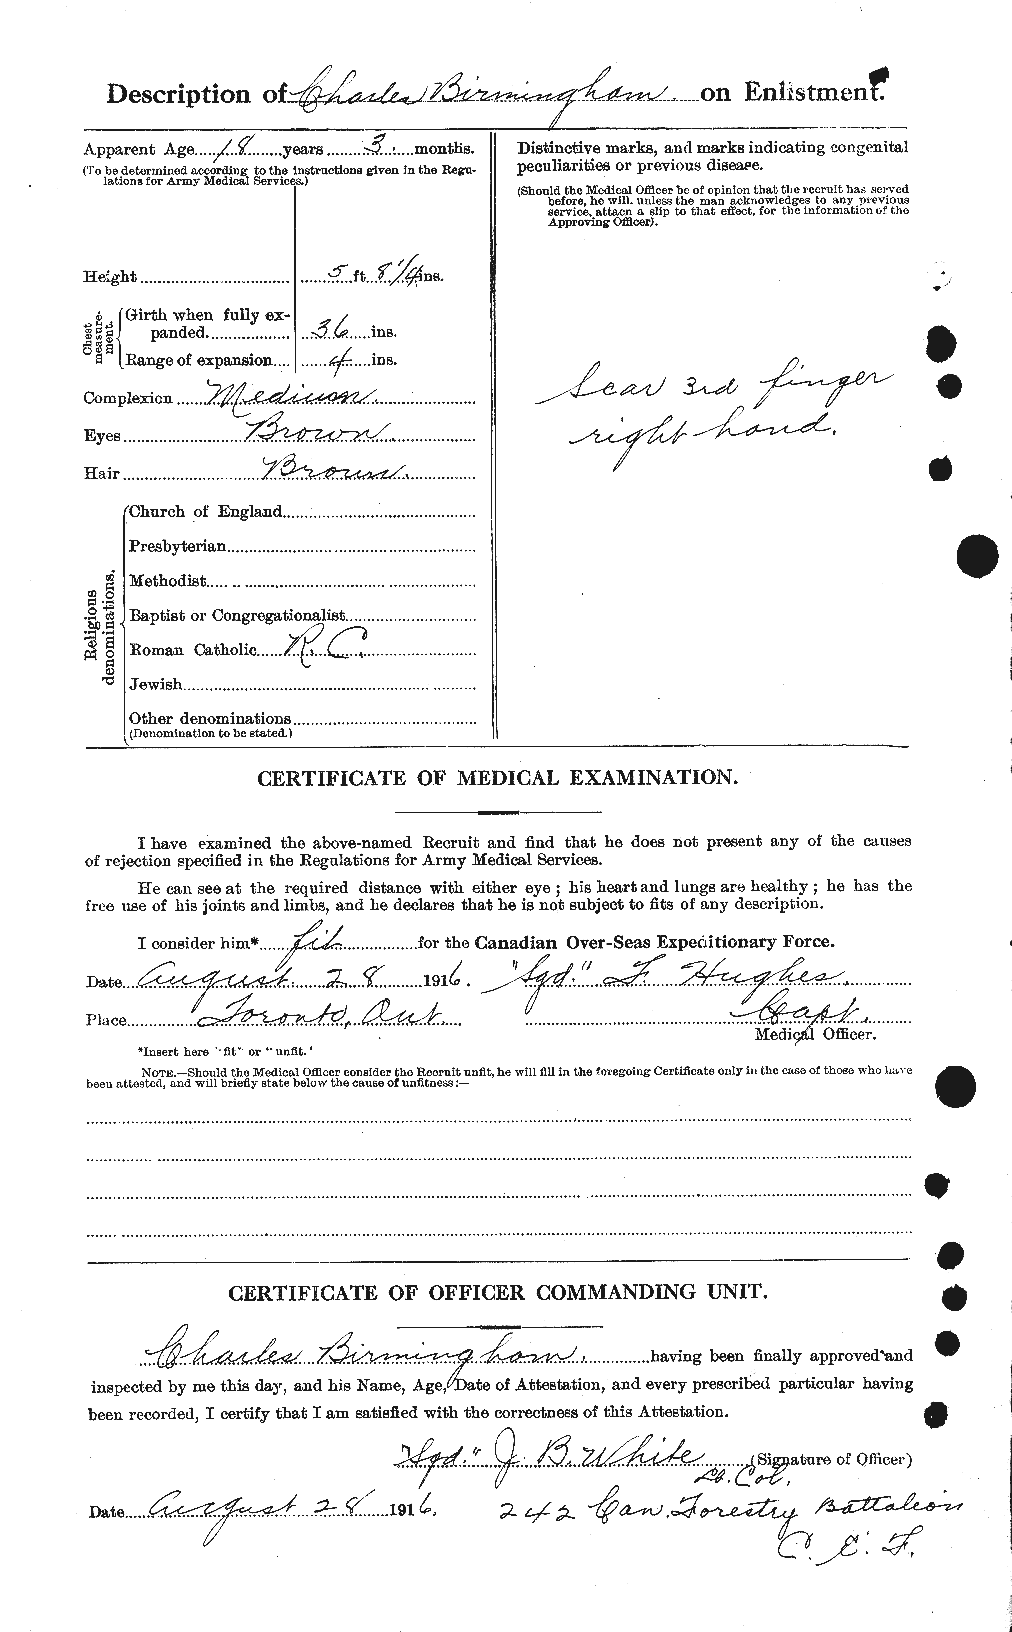 Personnel Records of the First World War - CEF 243927b